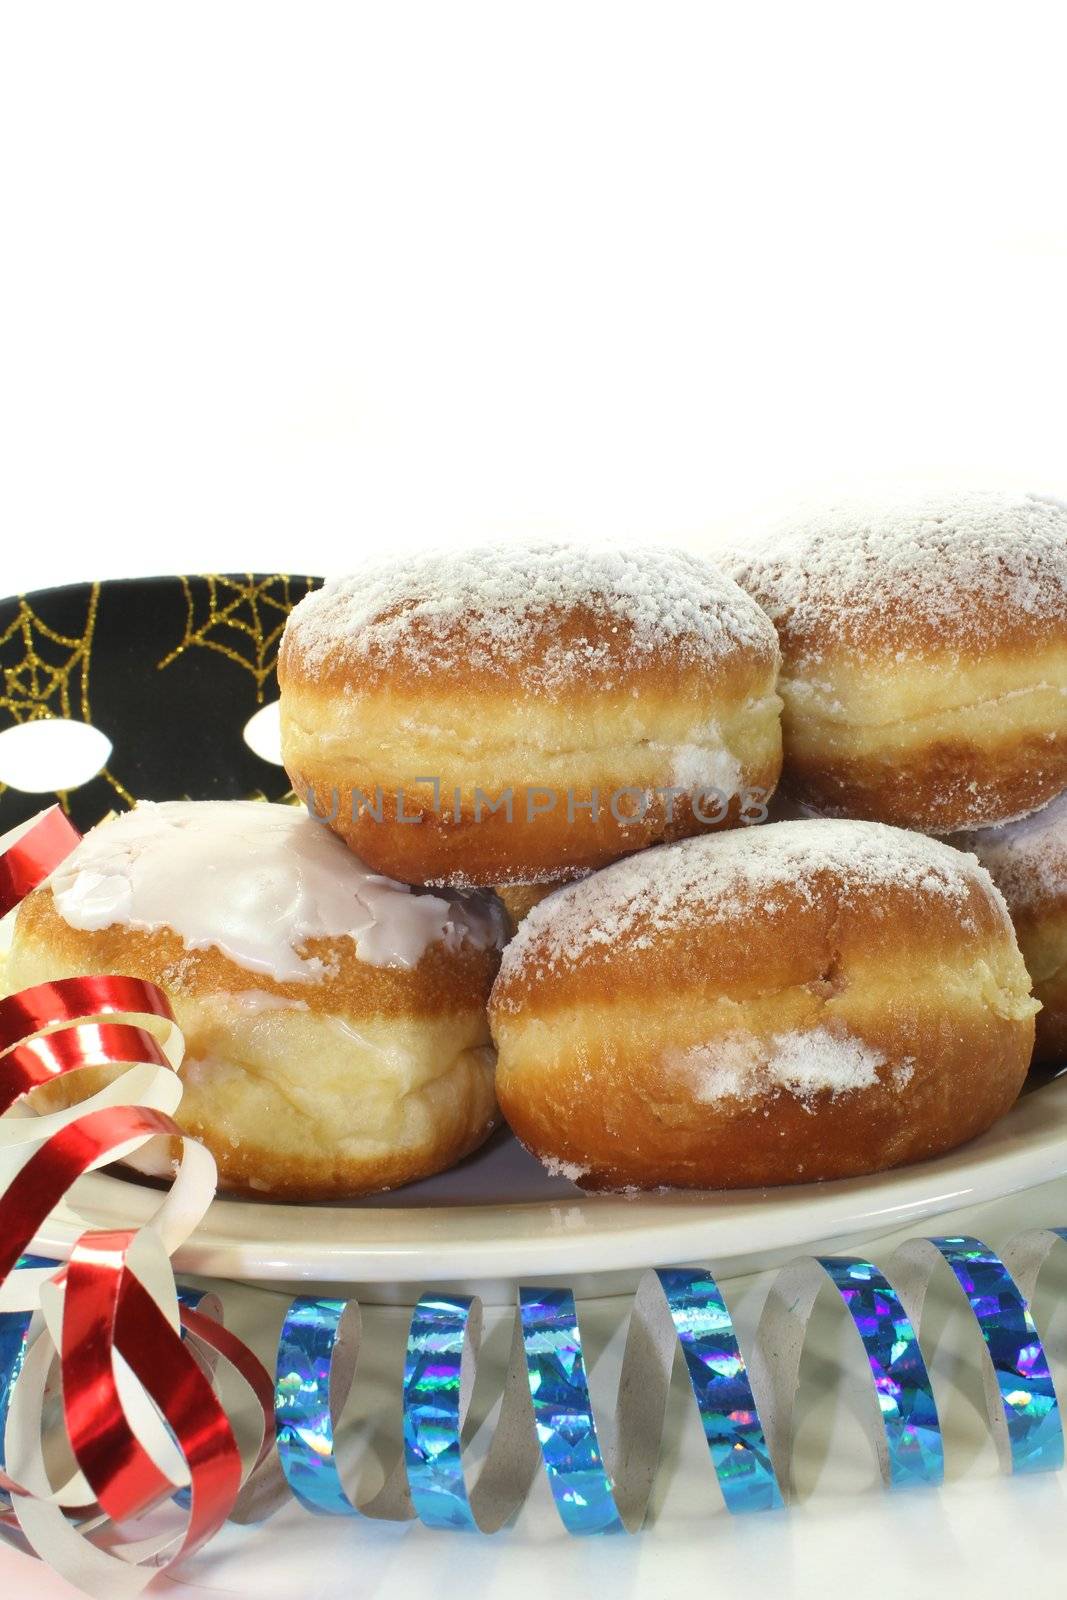 a plate of donuts and carnival decoration